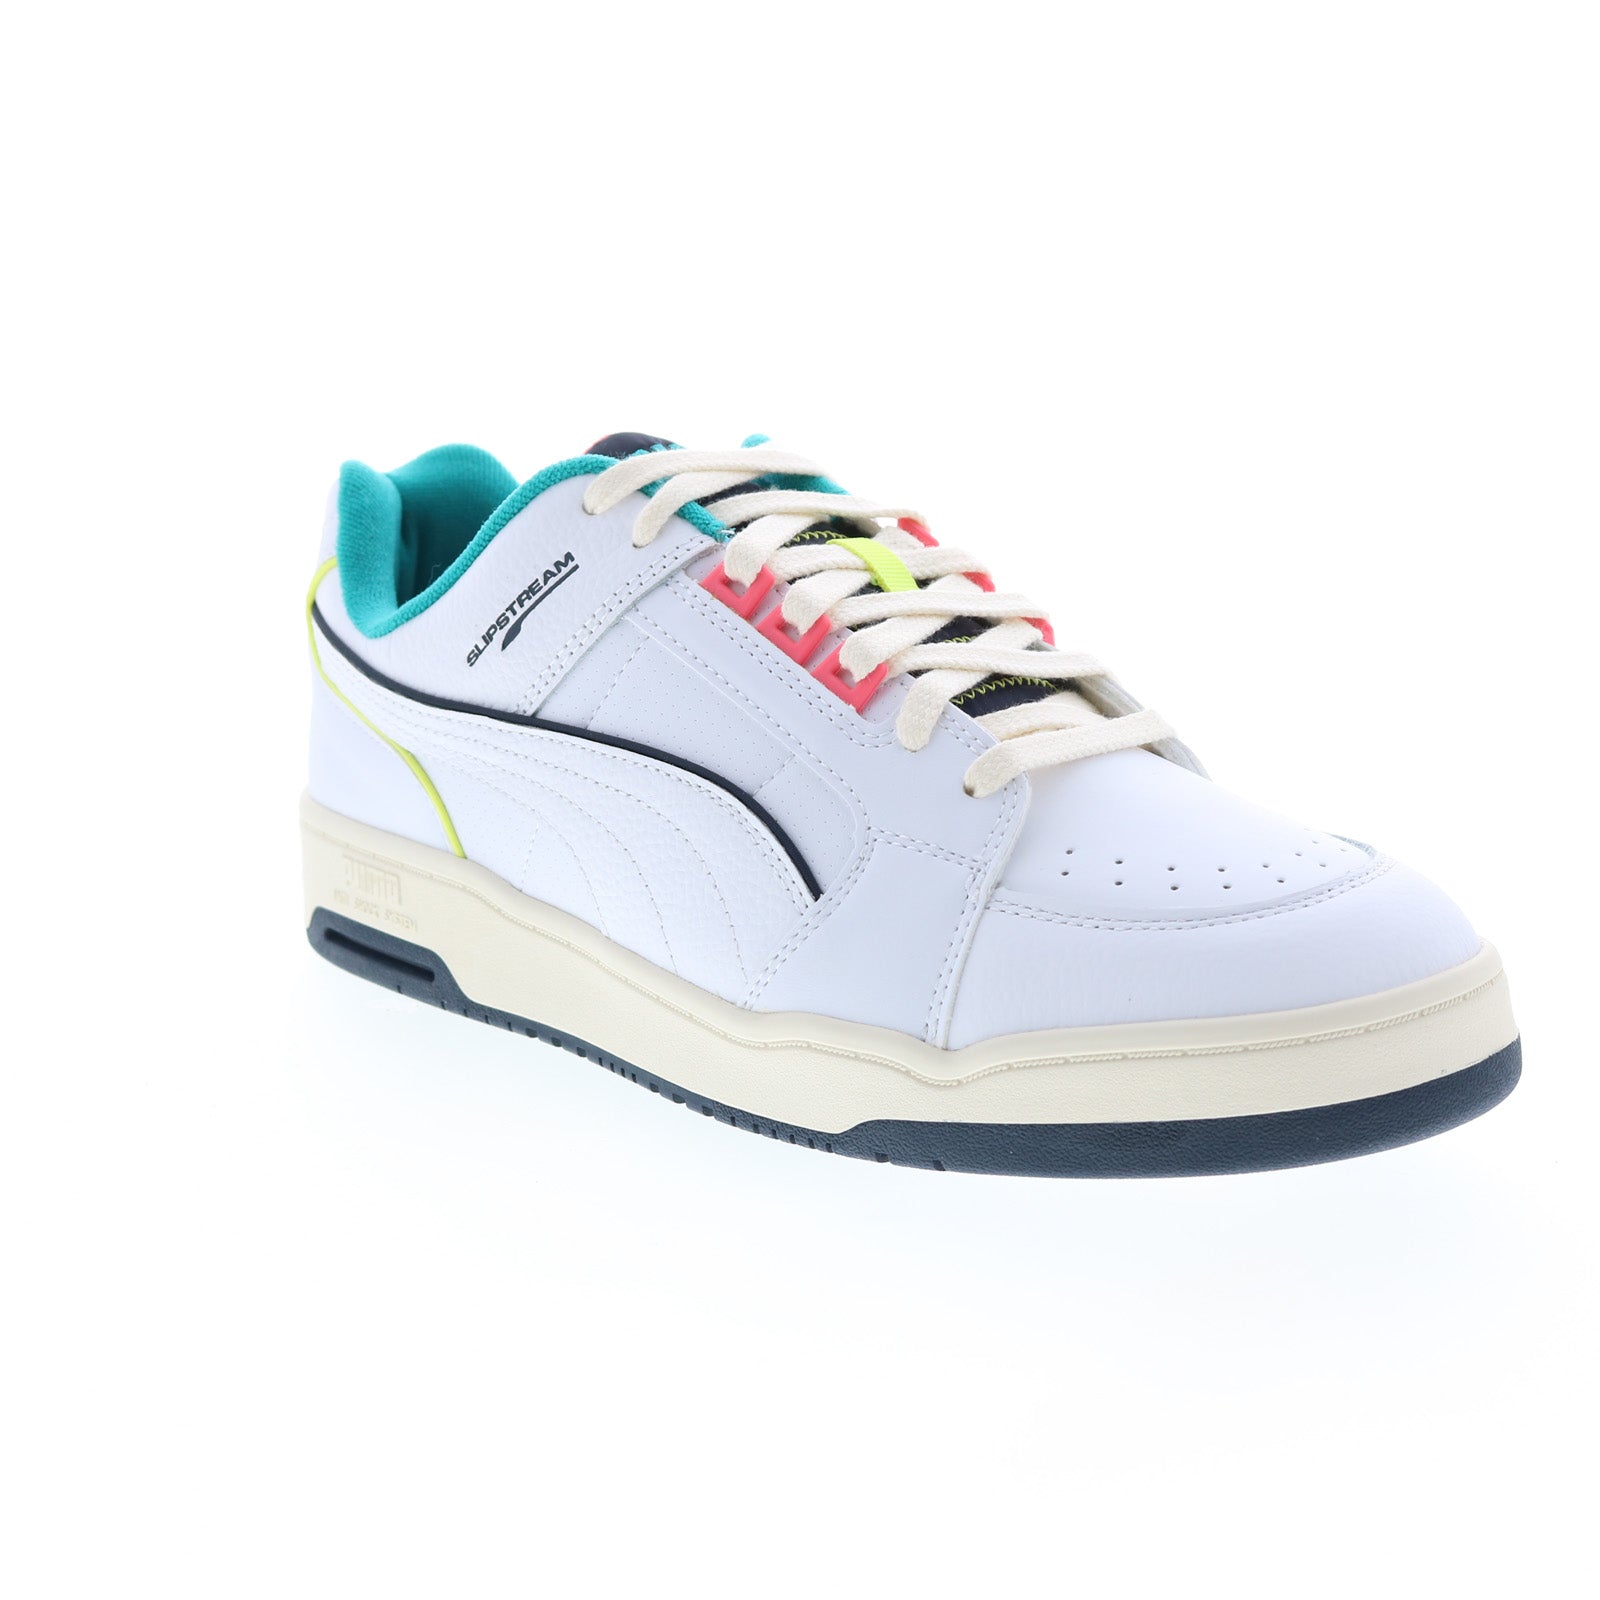  PUMA Womens Slipstream Runaway Lace Up Sneakers Shoes Casual -  White - Size 5.5 M